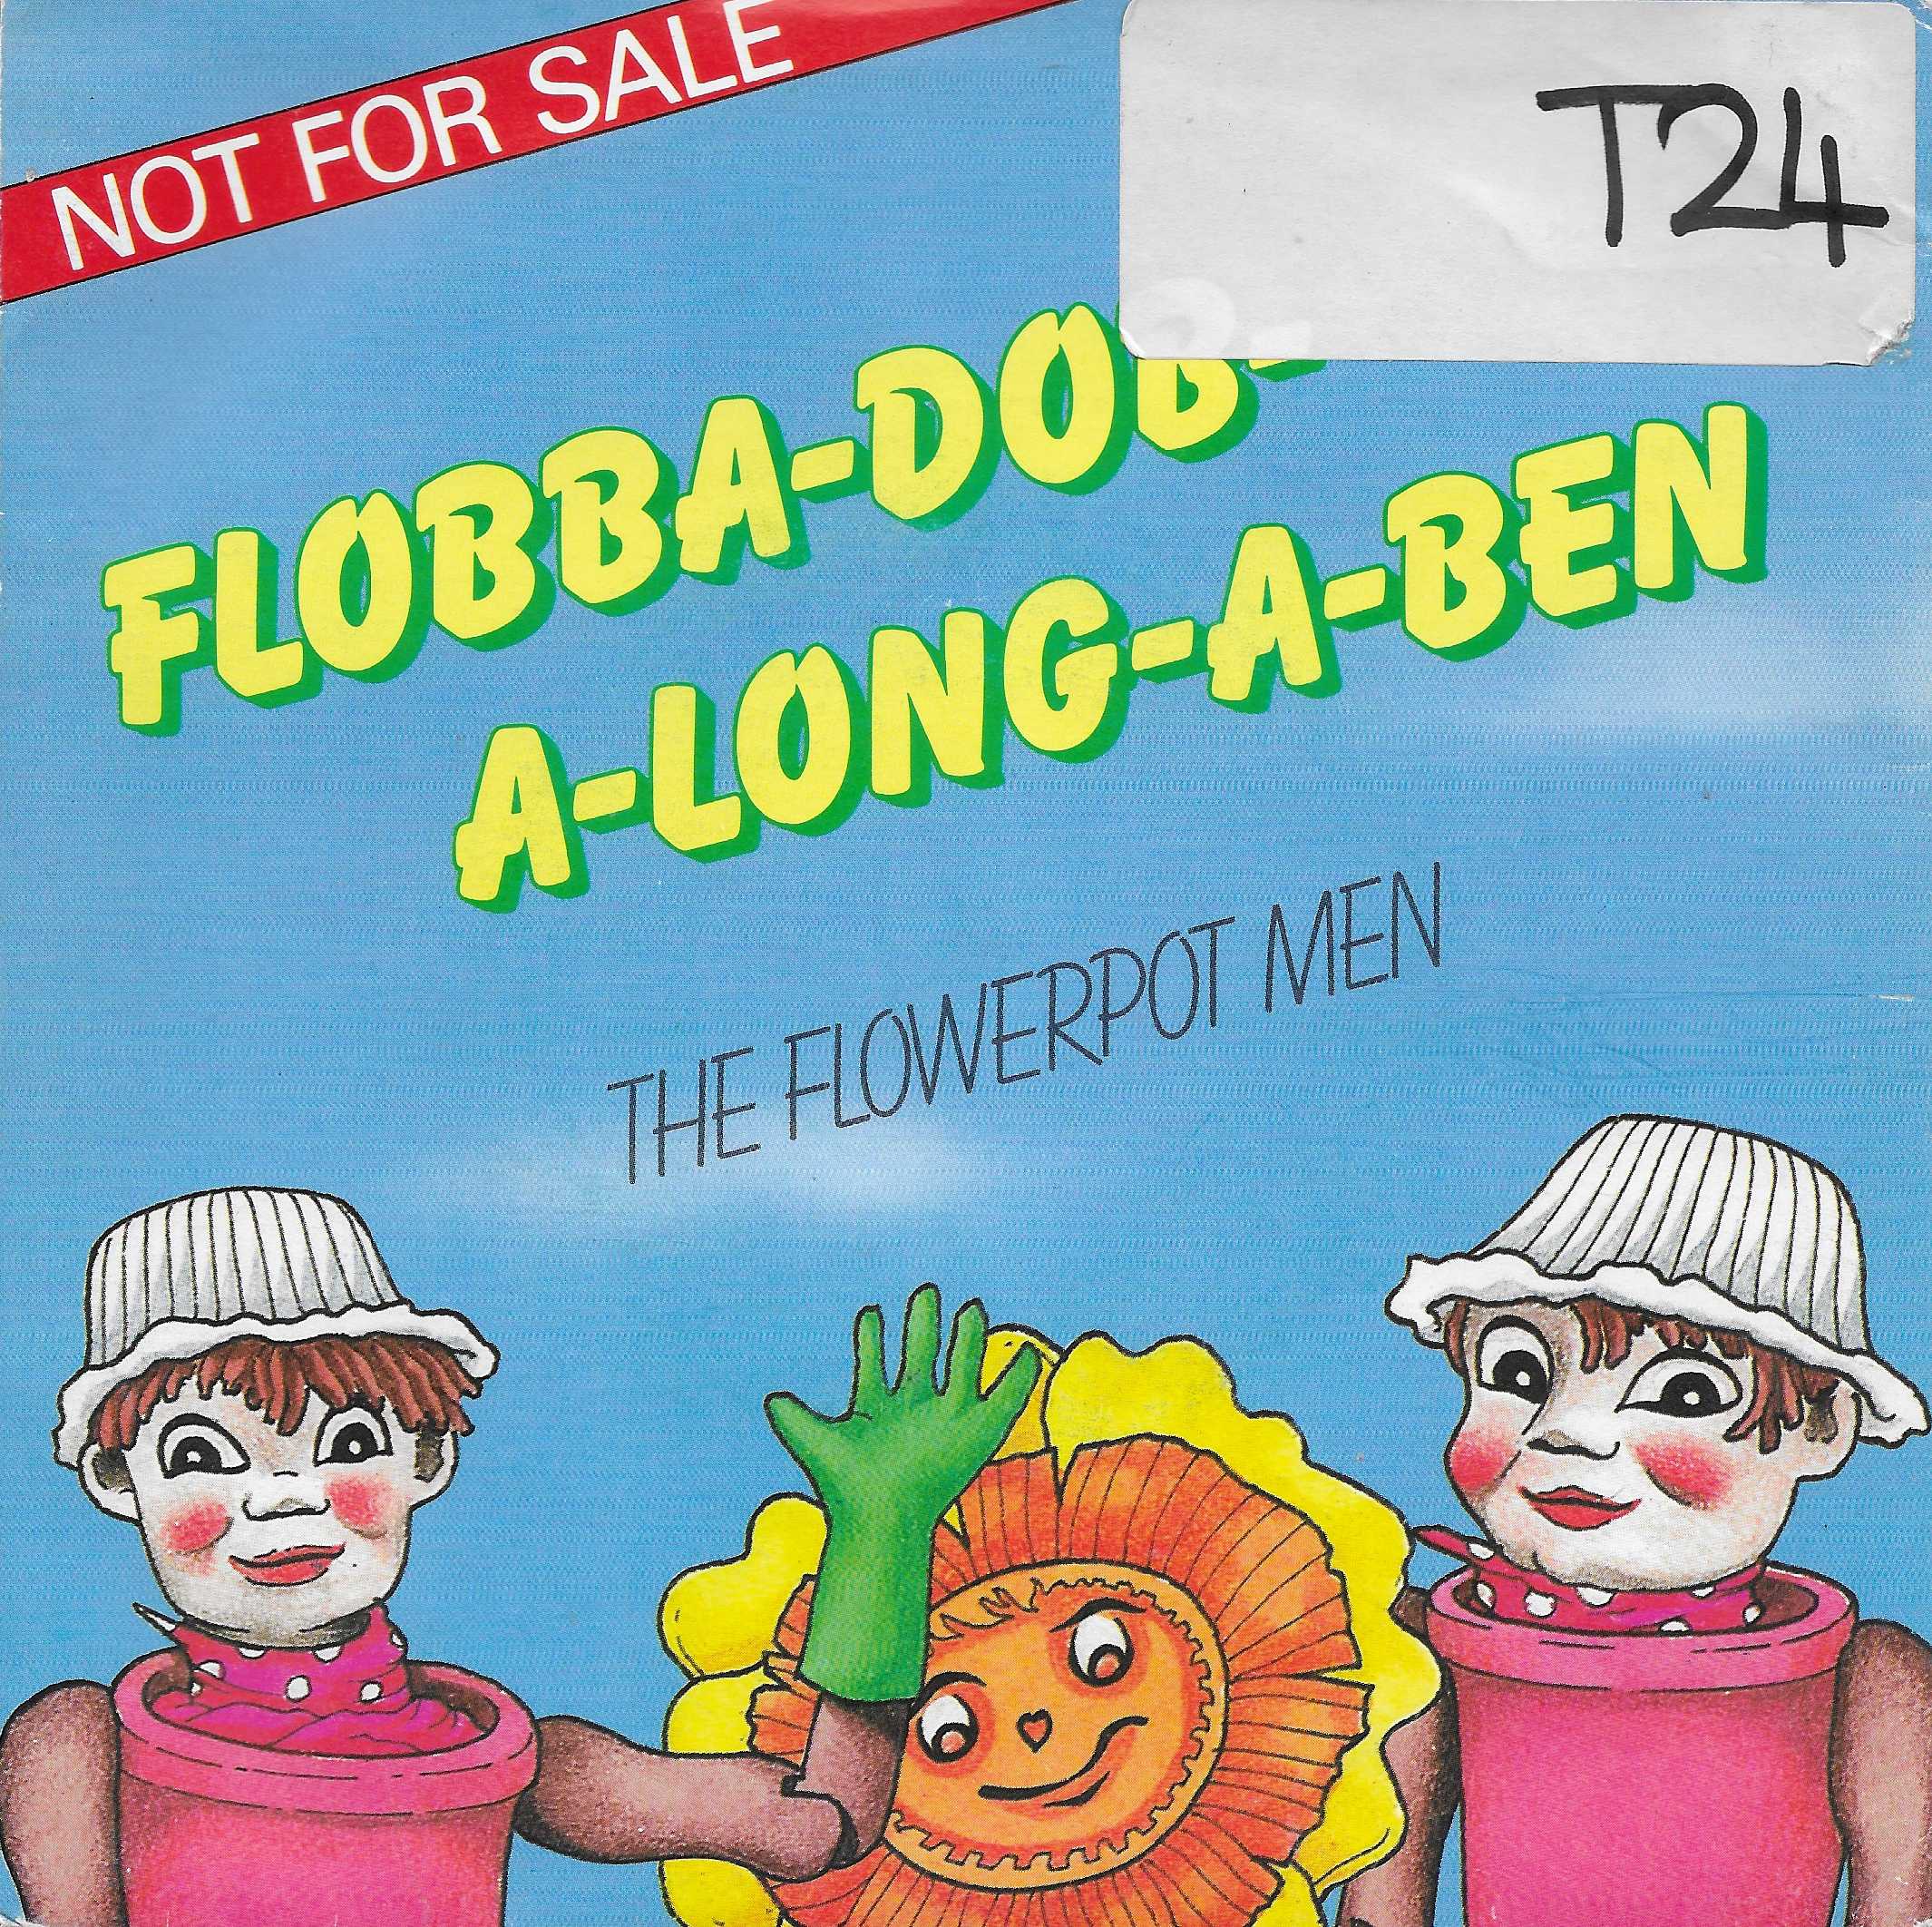 Picture of FLOB 1 Flobba-Dob-A-Long-A-Ben (The Flower Pot Men) by artist Grahame Lister / John OConnor from the BBC records and Tapes library